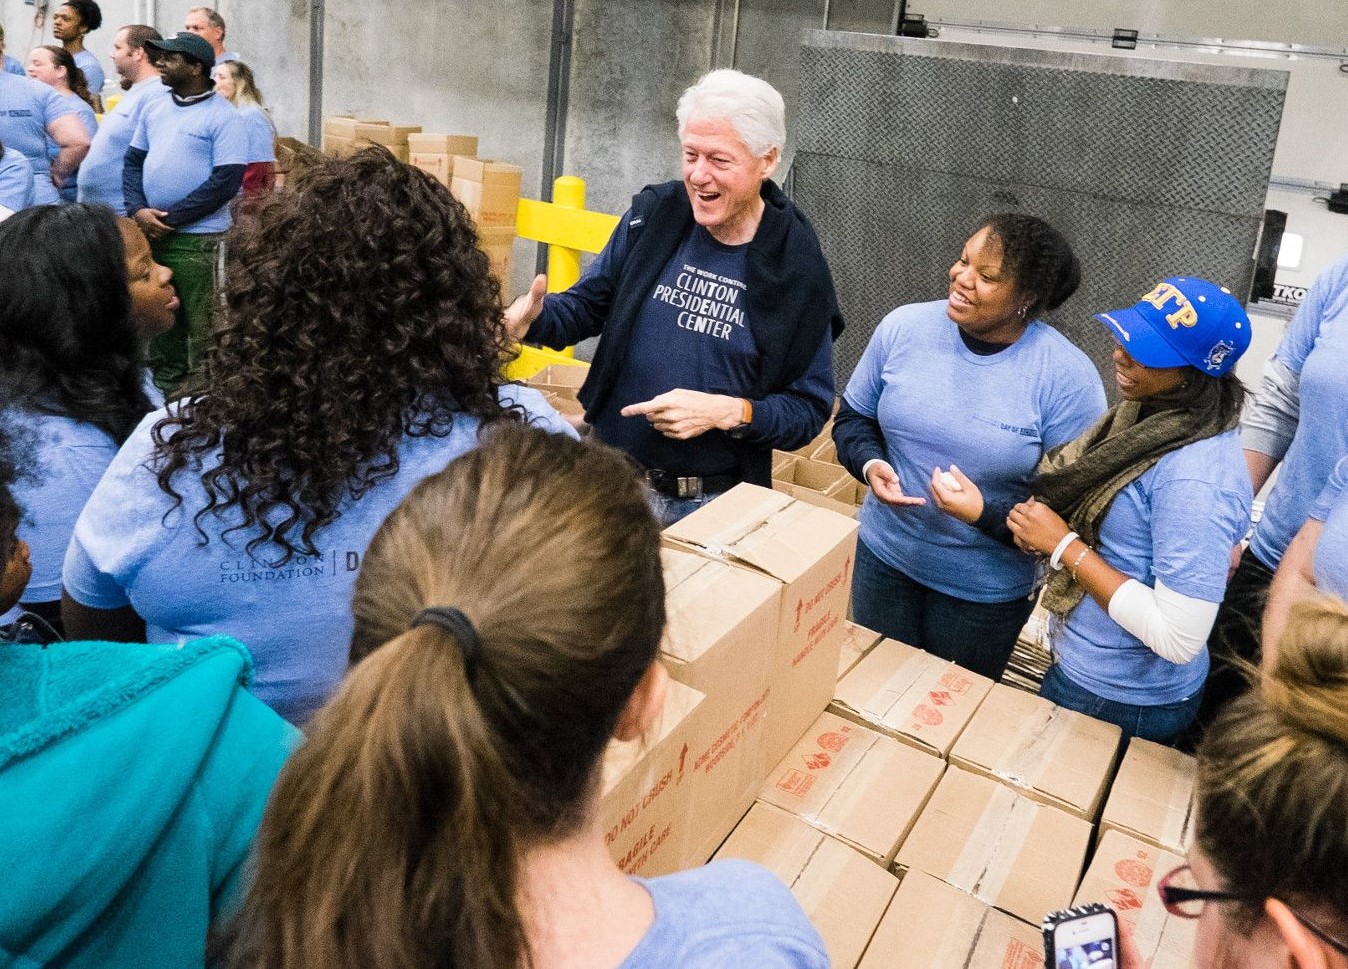 President Clinton and group of volunteers gather around boxes